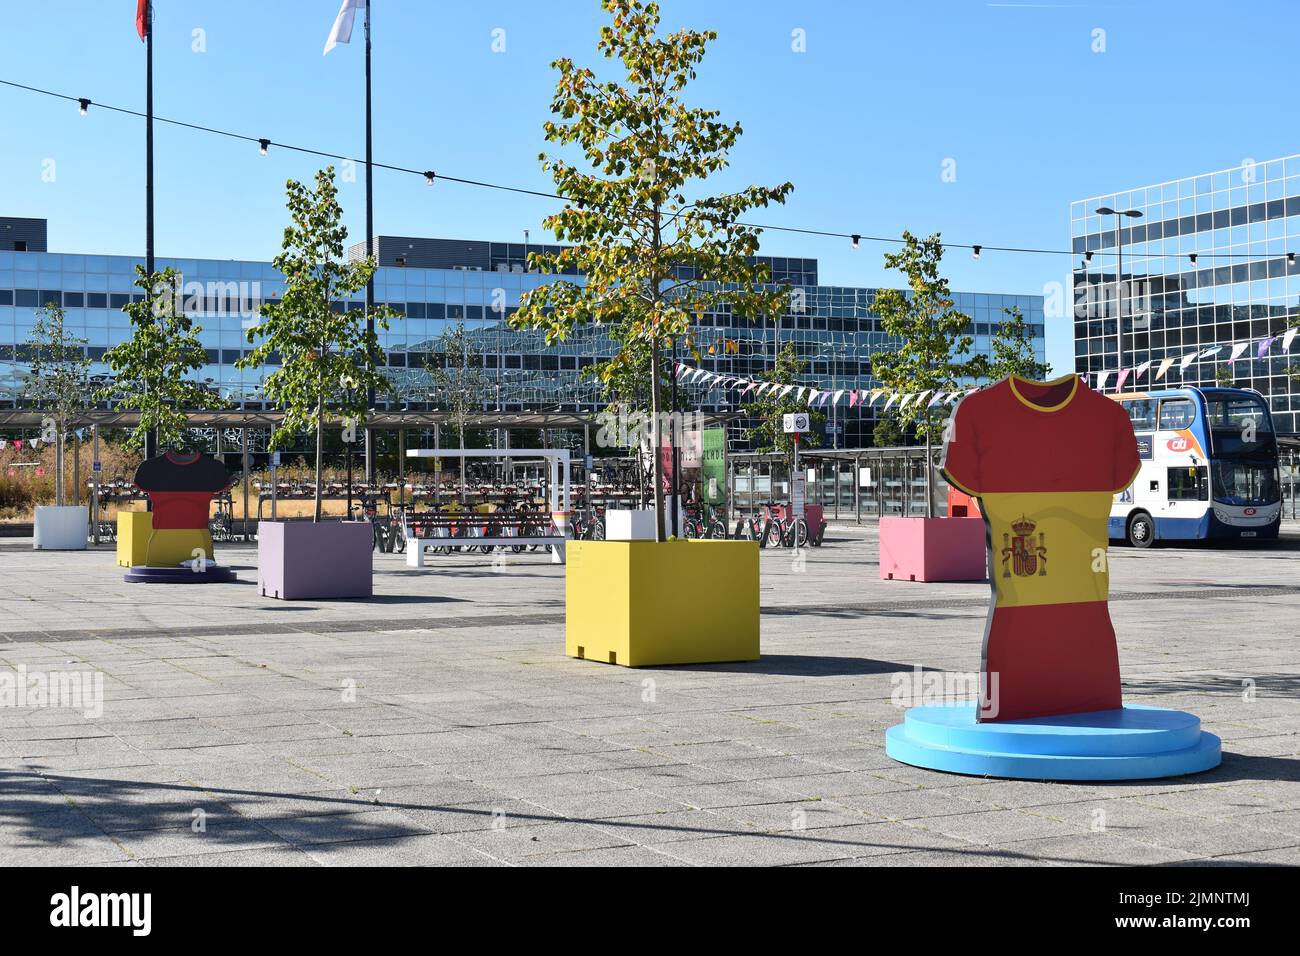 Selfie spot for the UEFA Women’s Euro England 2022 in the Fan Zone at Station Square, Milton Keynes. Stock Photo